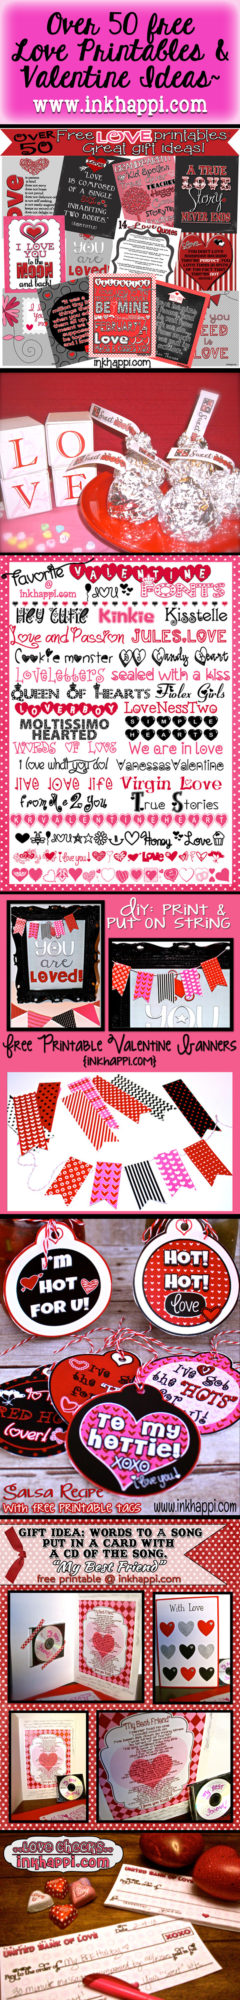 Over 50 free Love Printables and valentine ideas!